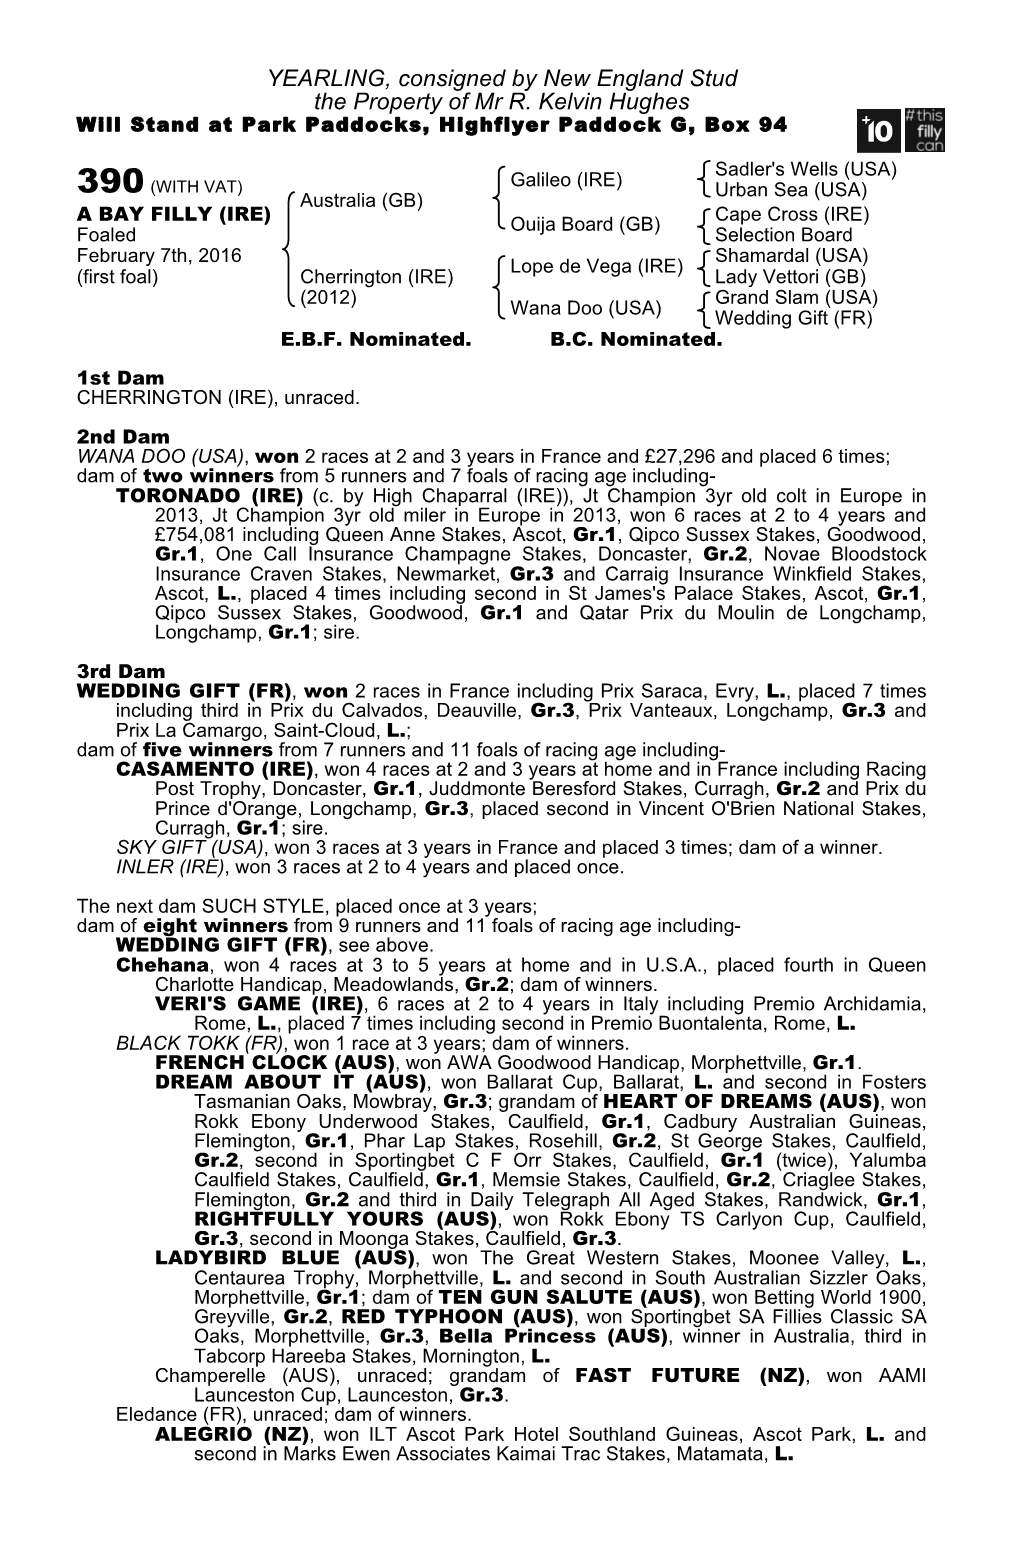 YEARLING, Consigned by New England Stud the Property of Mr R